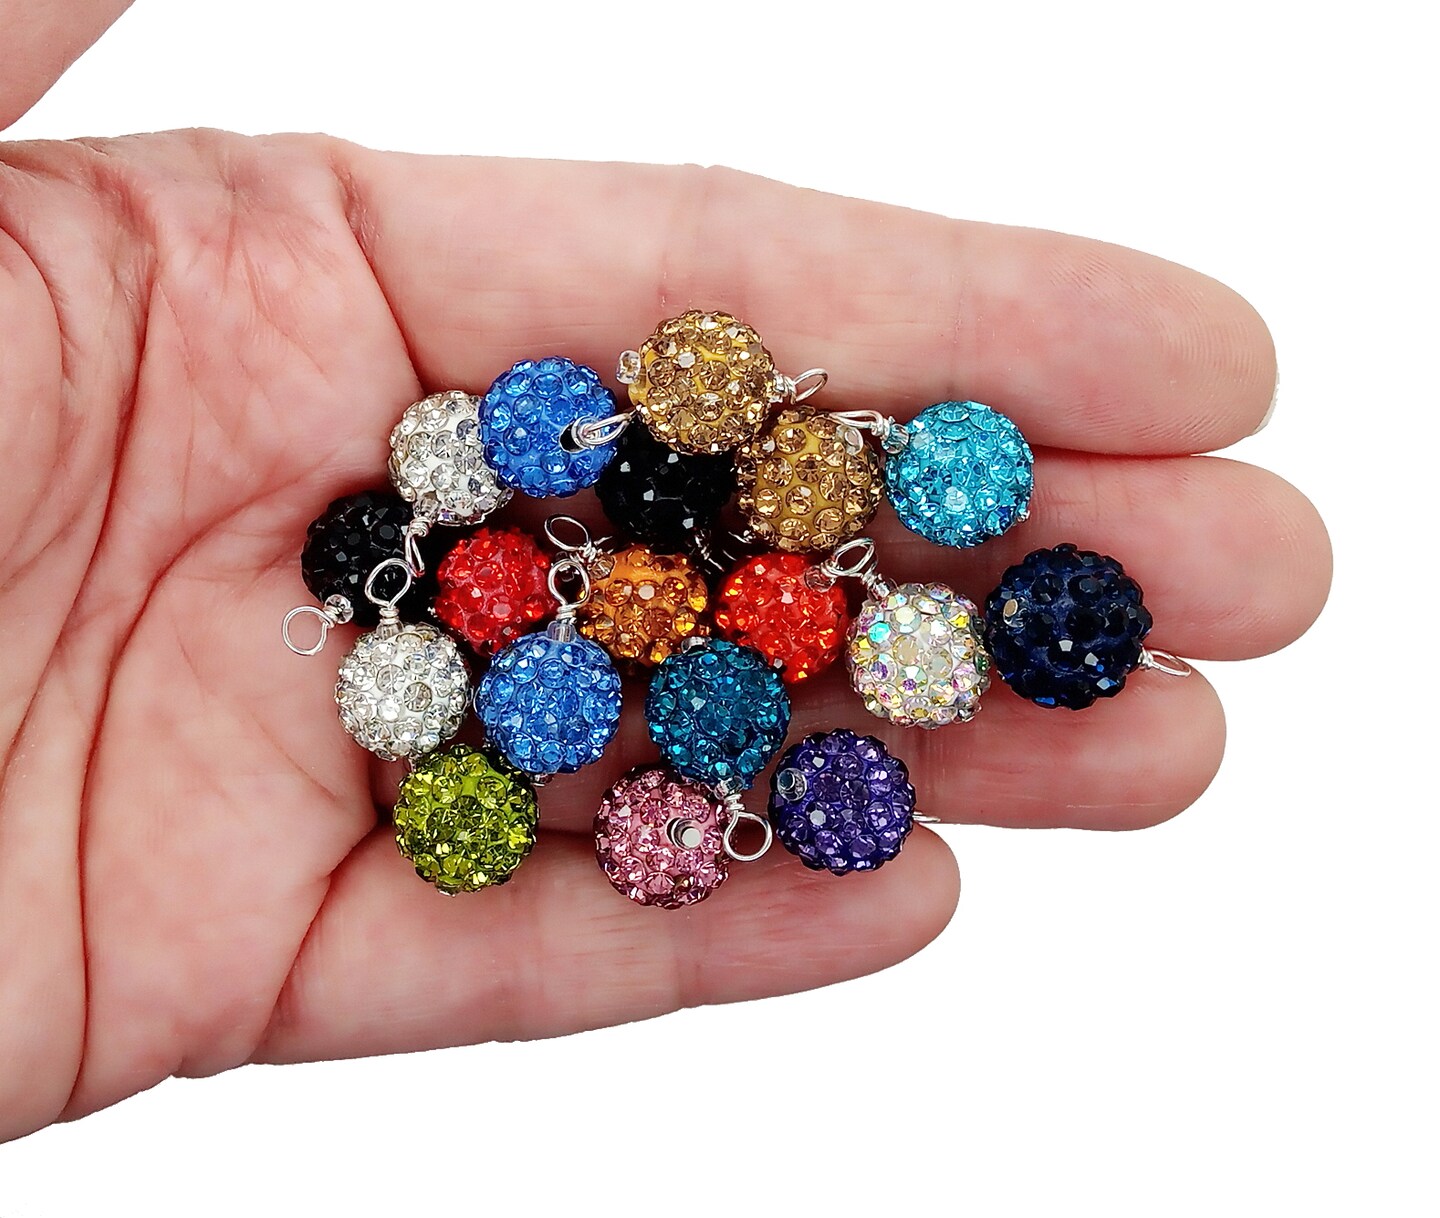 Sparkling Mini Christmas Ornaments, 8 pieces with Hooks, Pave Ball Miniatures, Color Mix Varies, Adorabilities